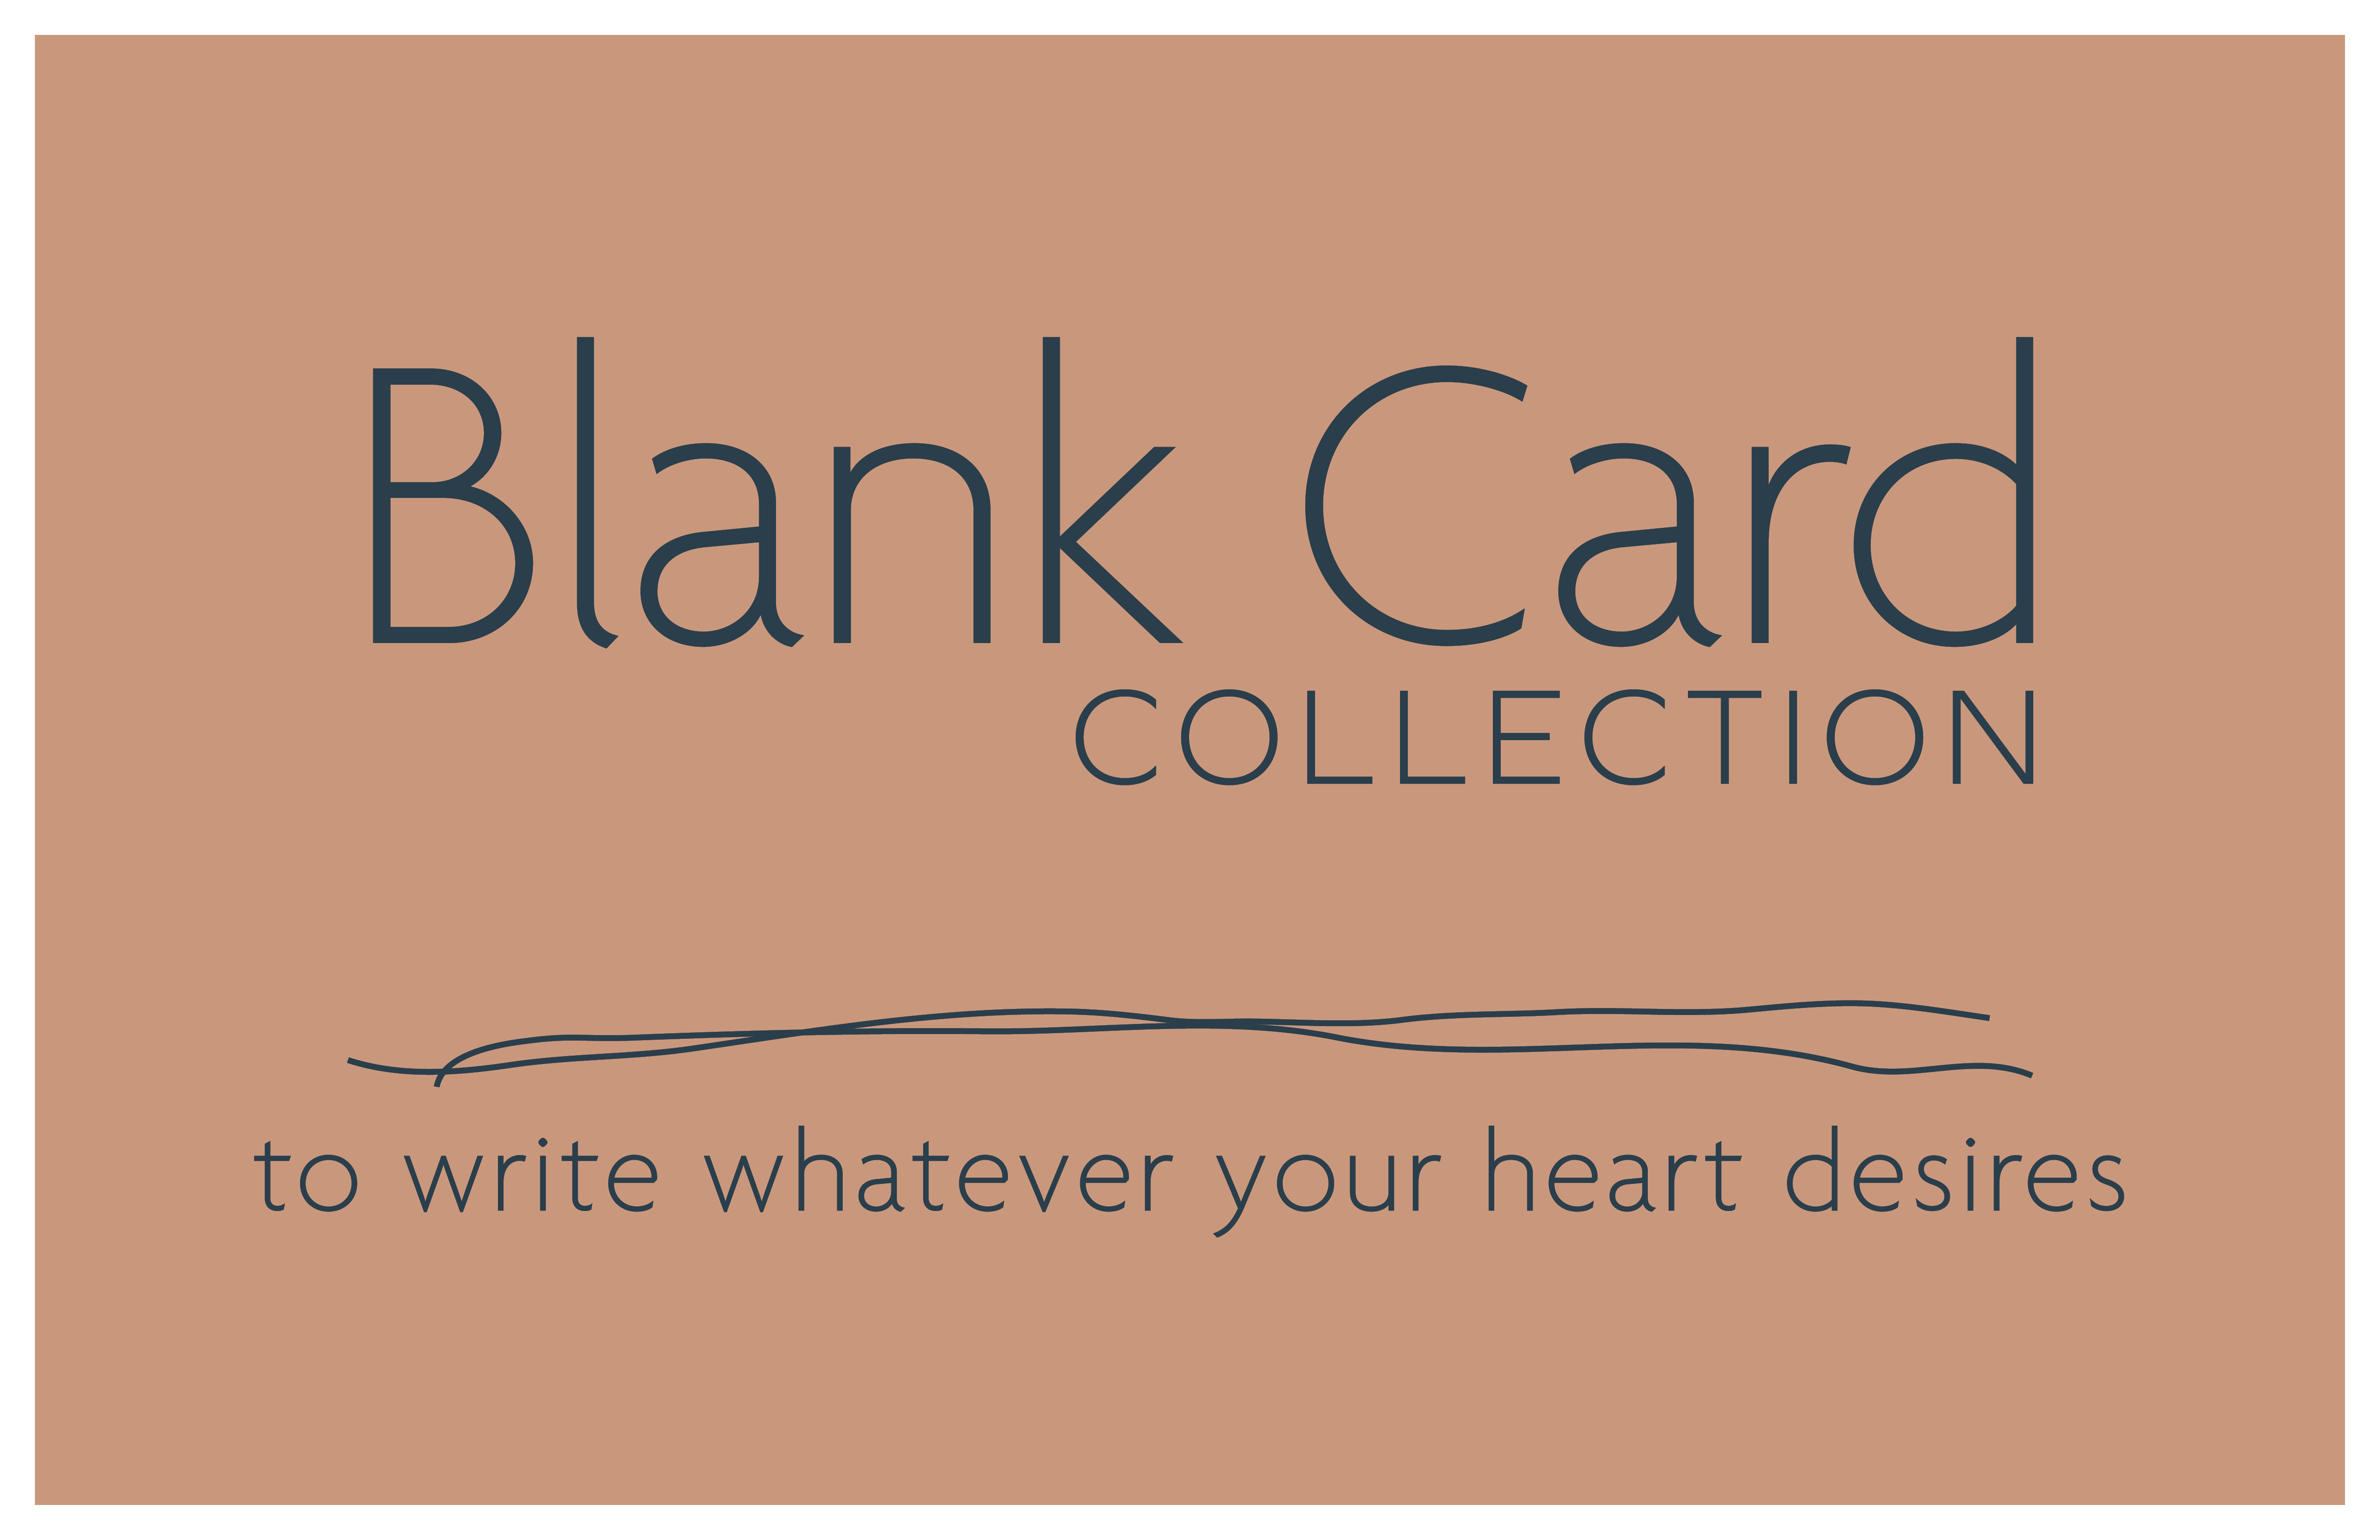 light coral background with text that says"Blank card collection - to write whatever your heart desires."